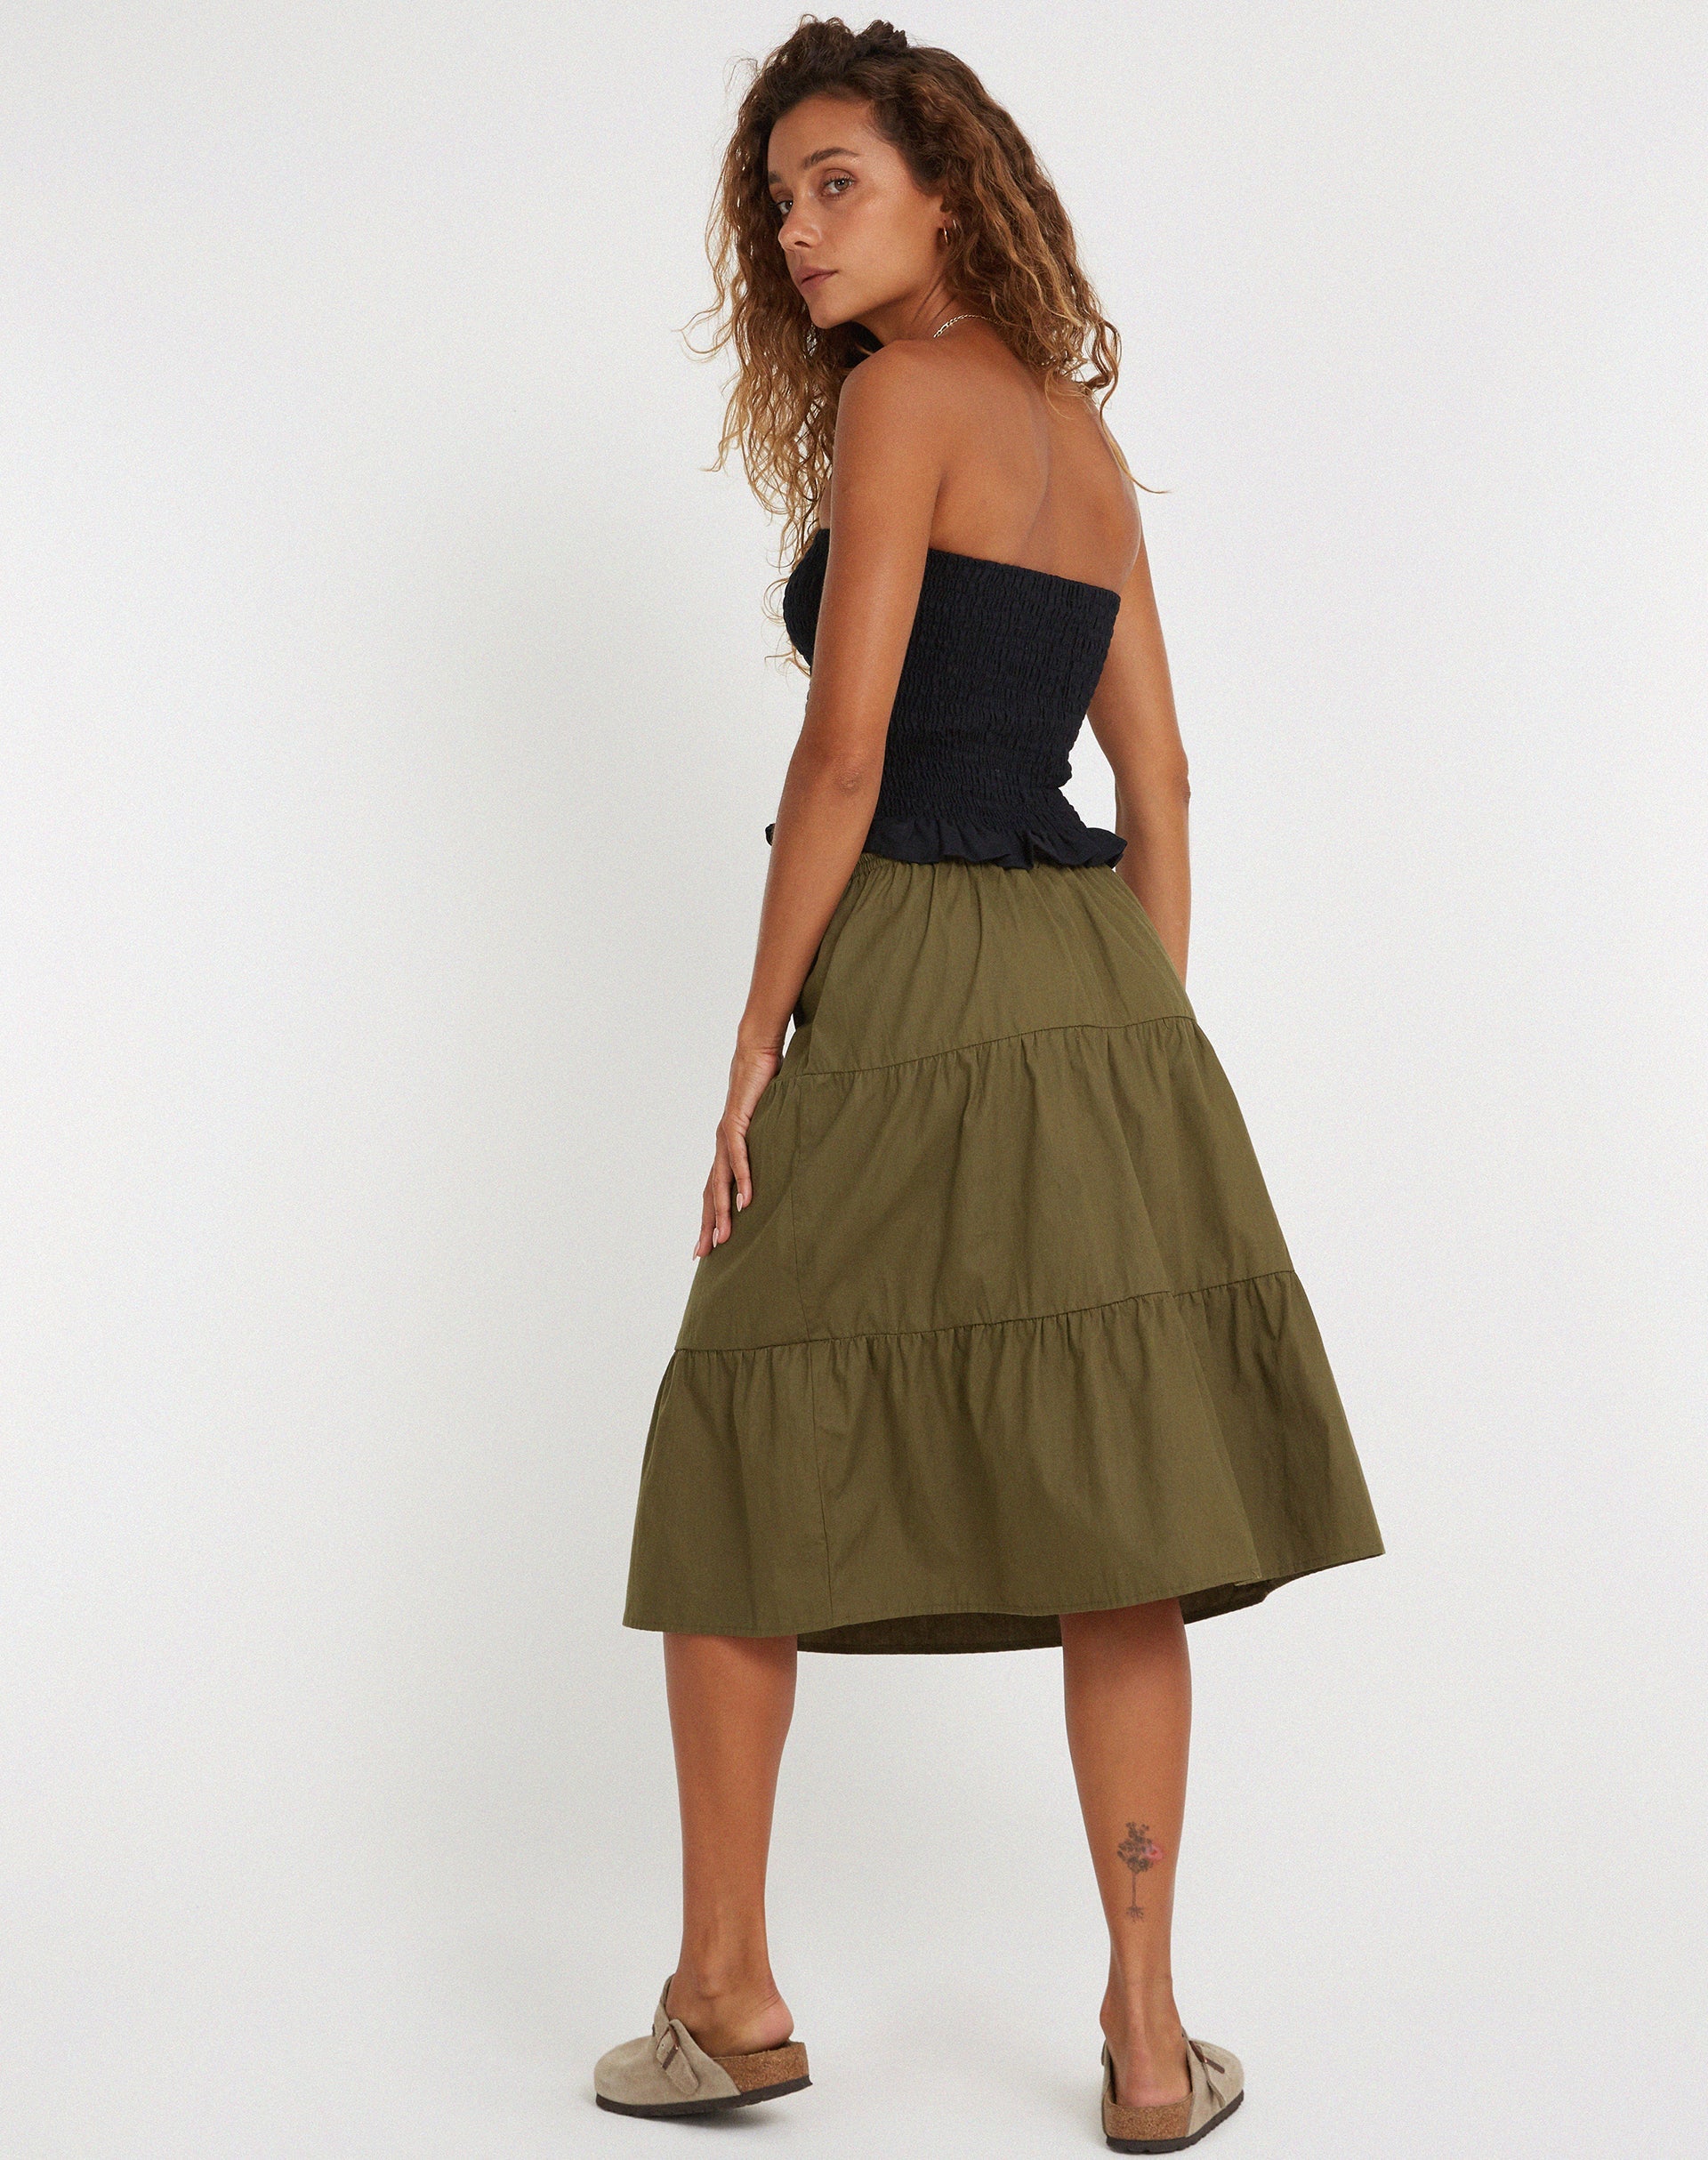 image of Reef Midi Skirt in Loden Green